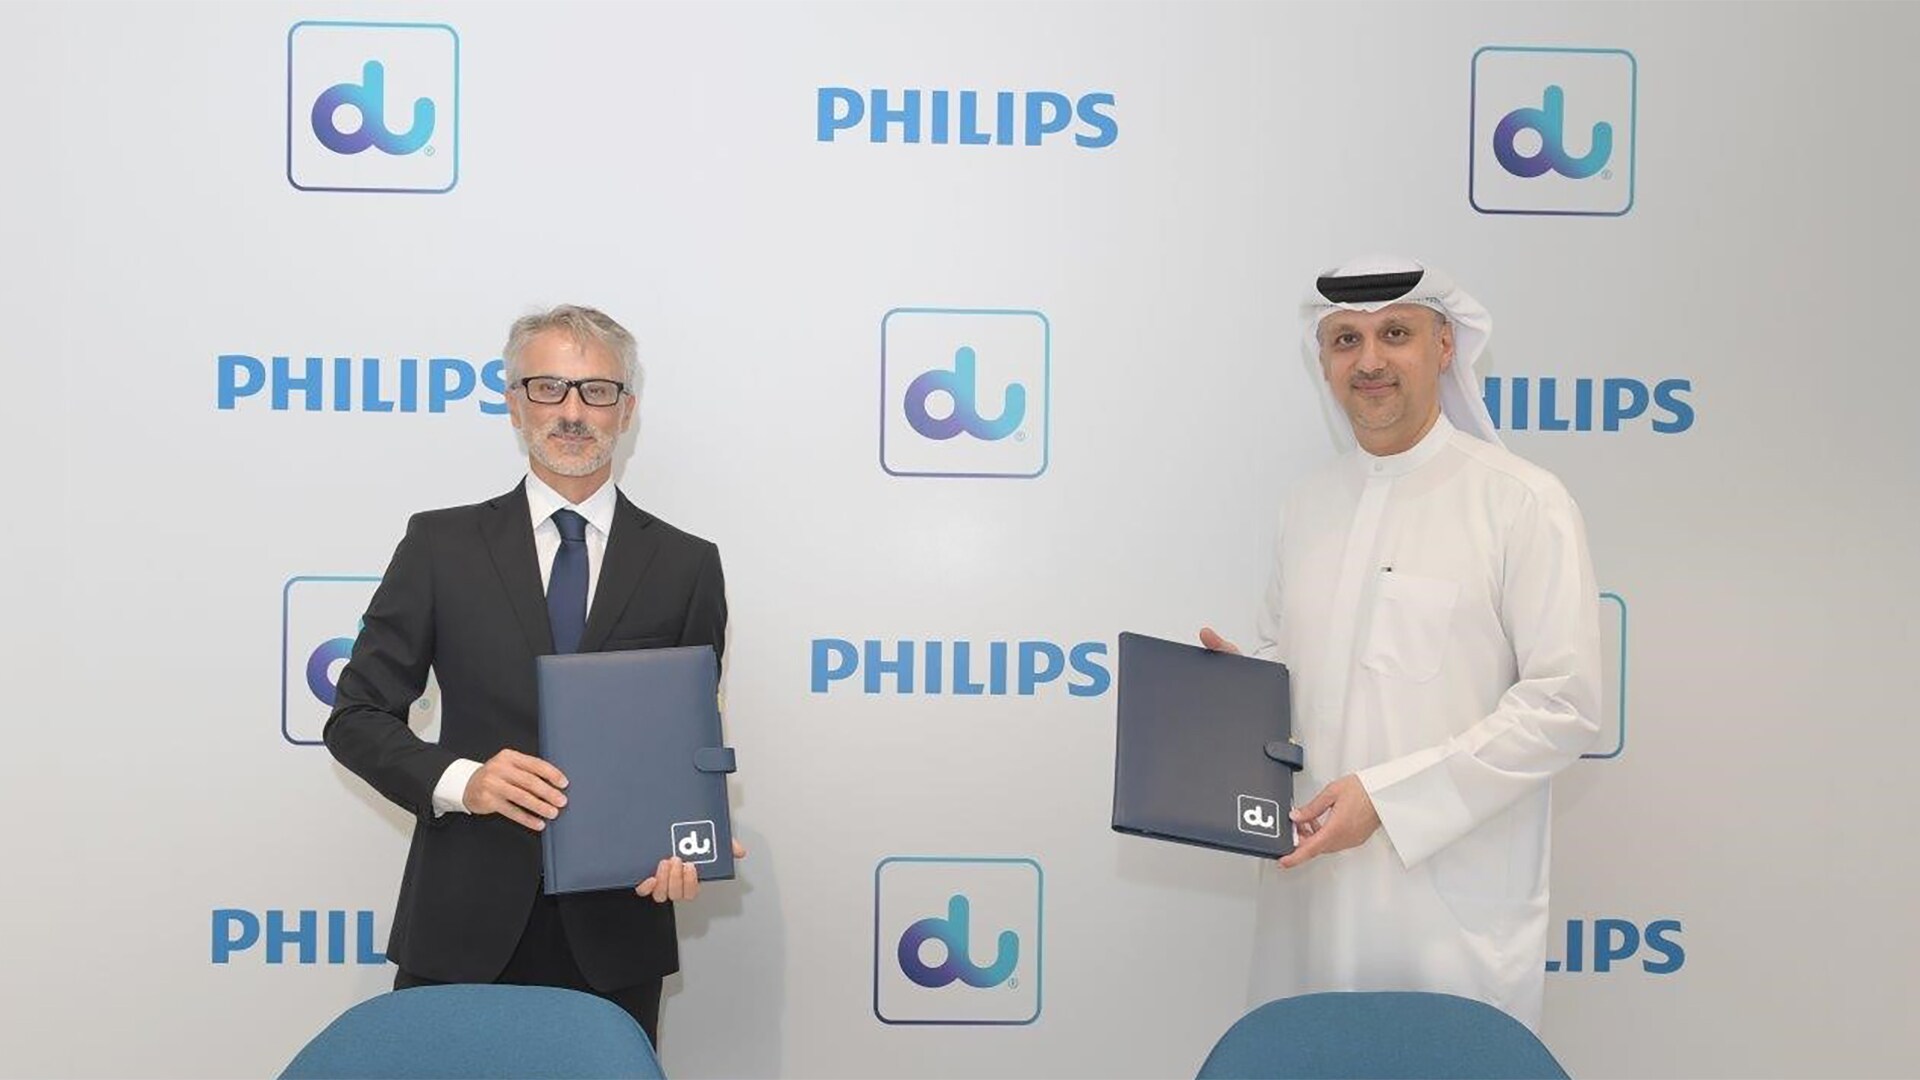 du and Philips partner to accelerate a data-driven healthcare transformation in the UAE